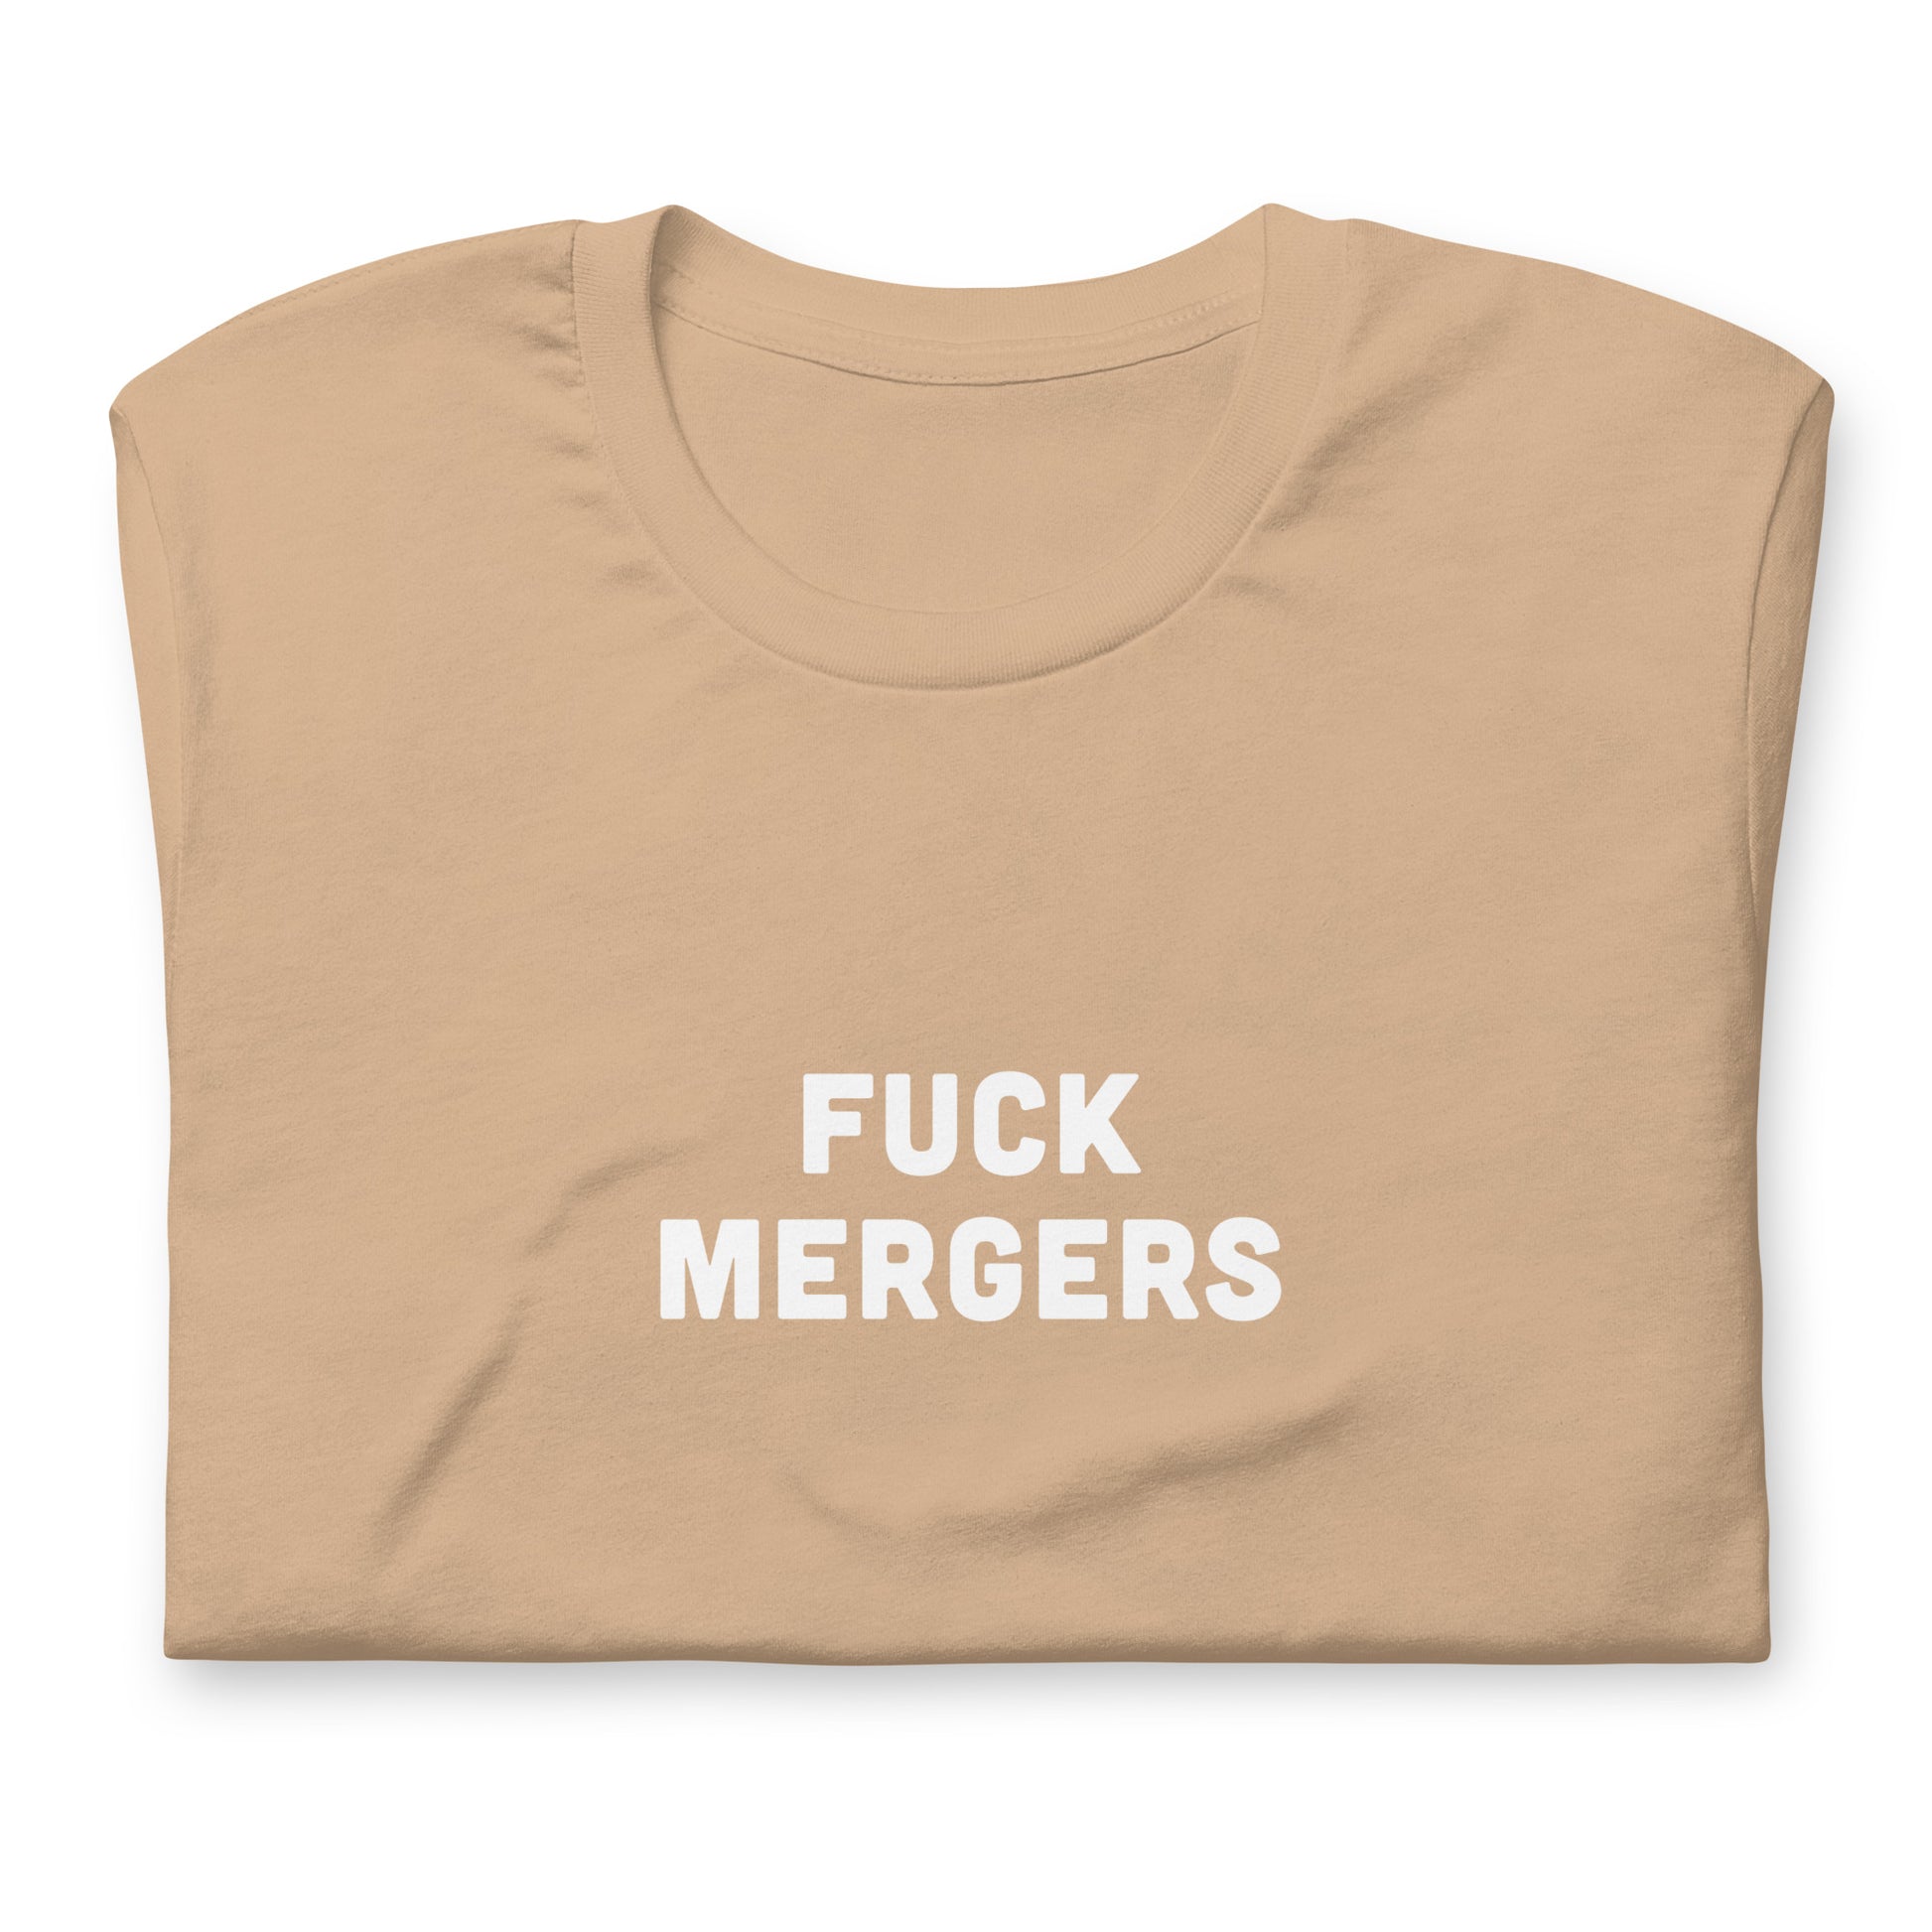 Fuck Mergers T-Shirt Size XL Color Forest